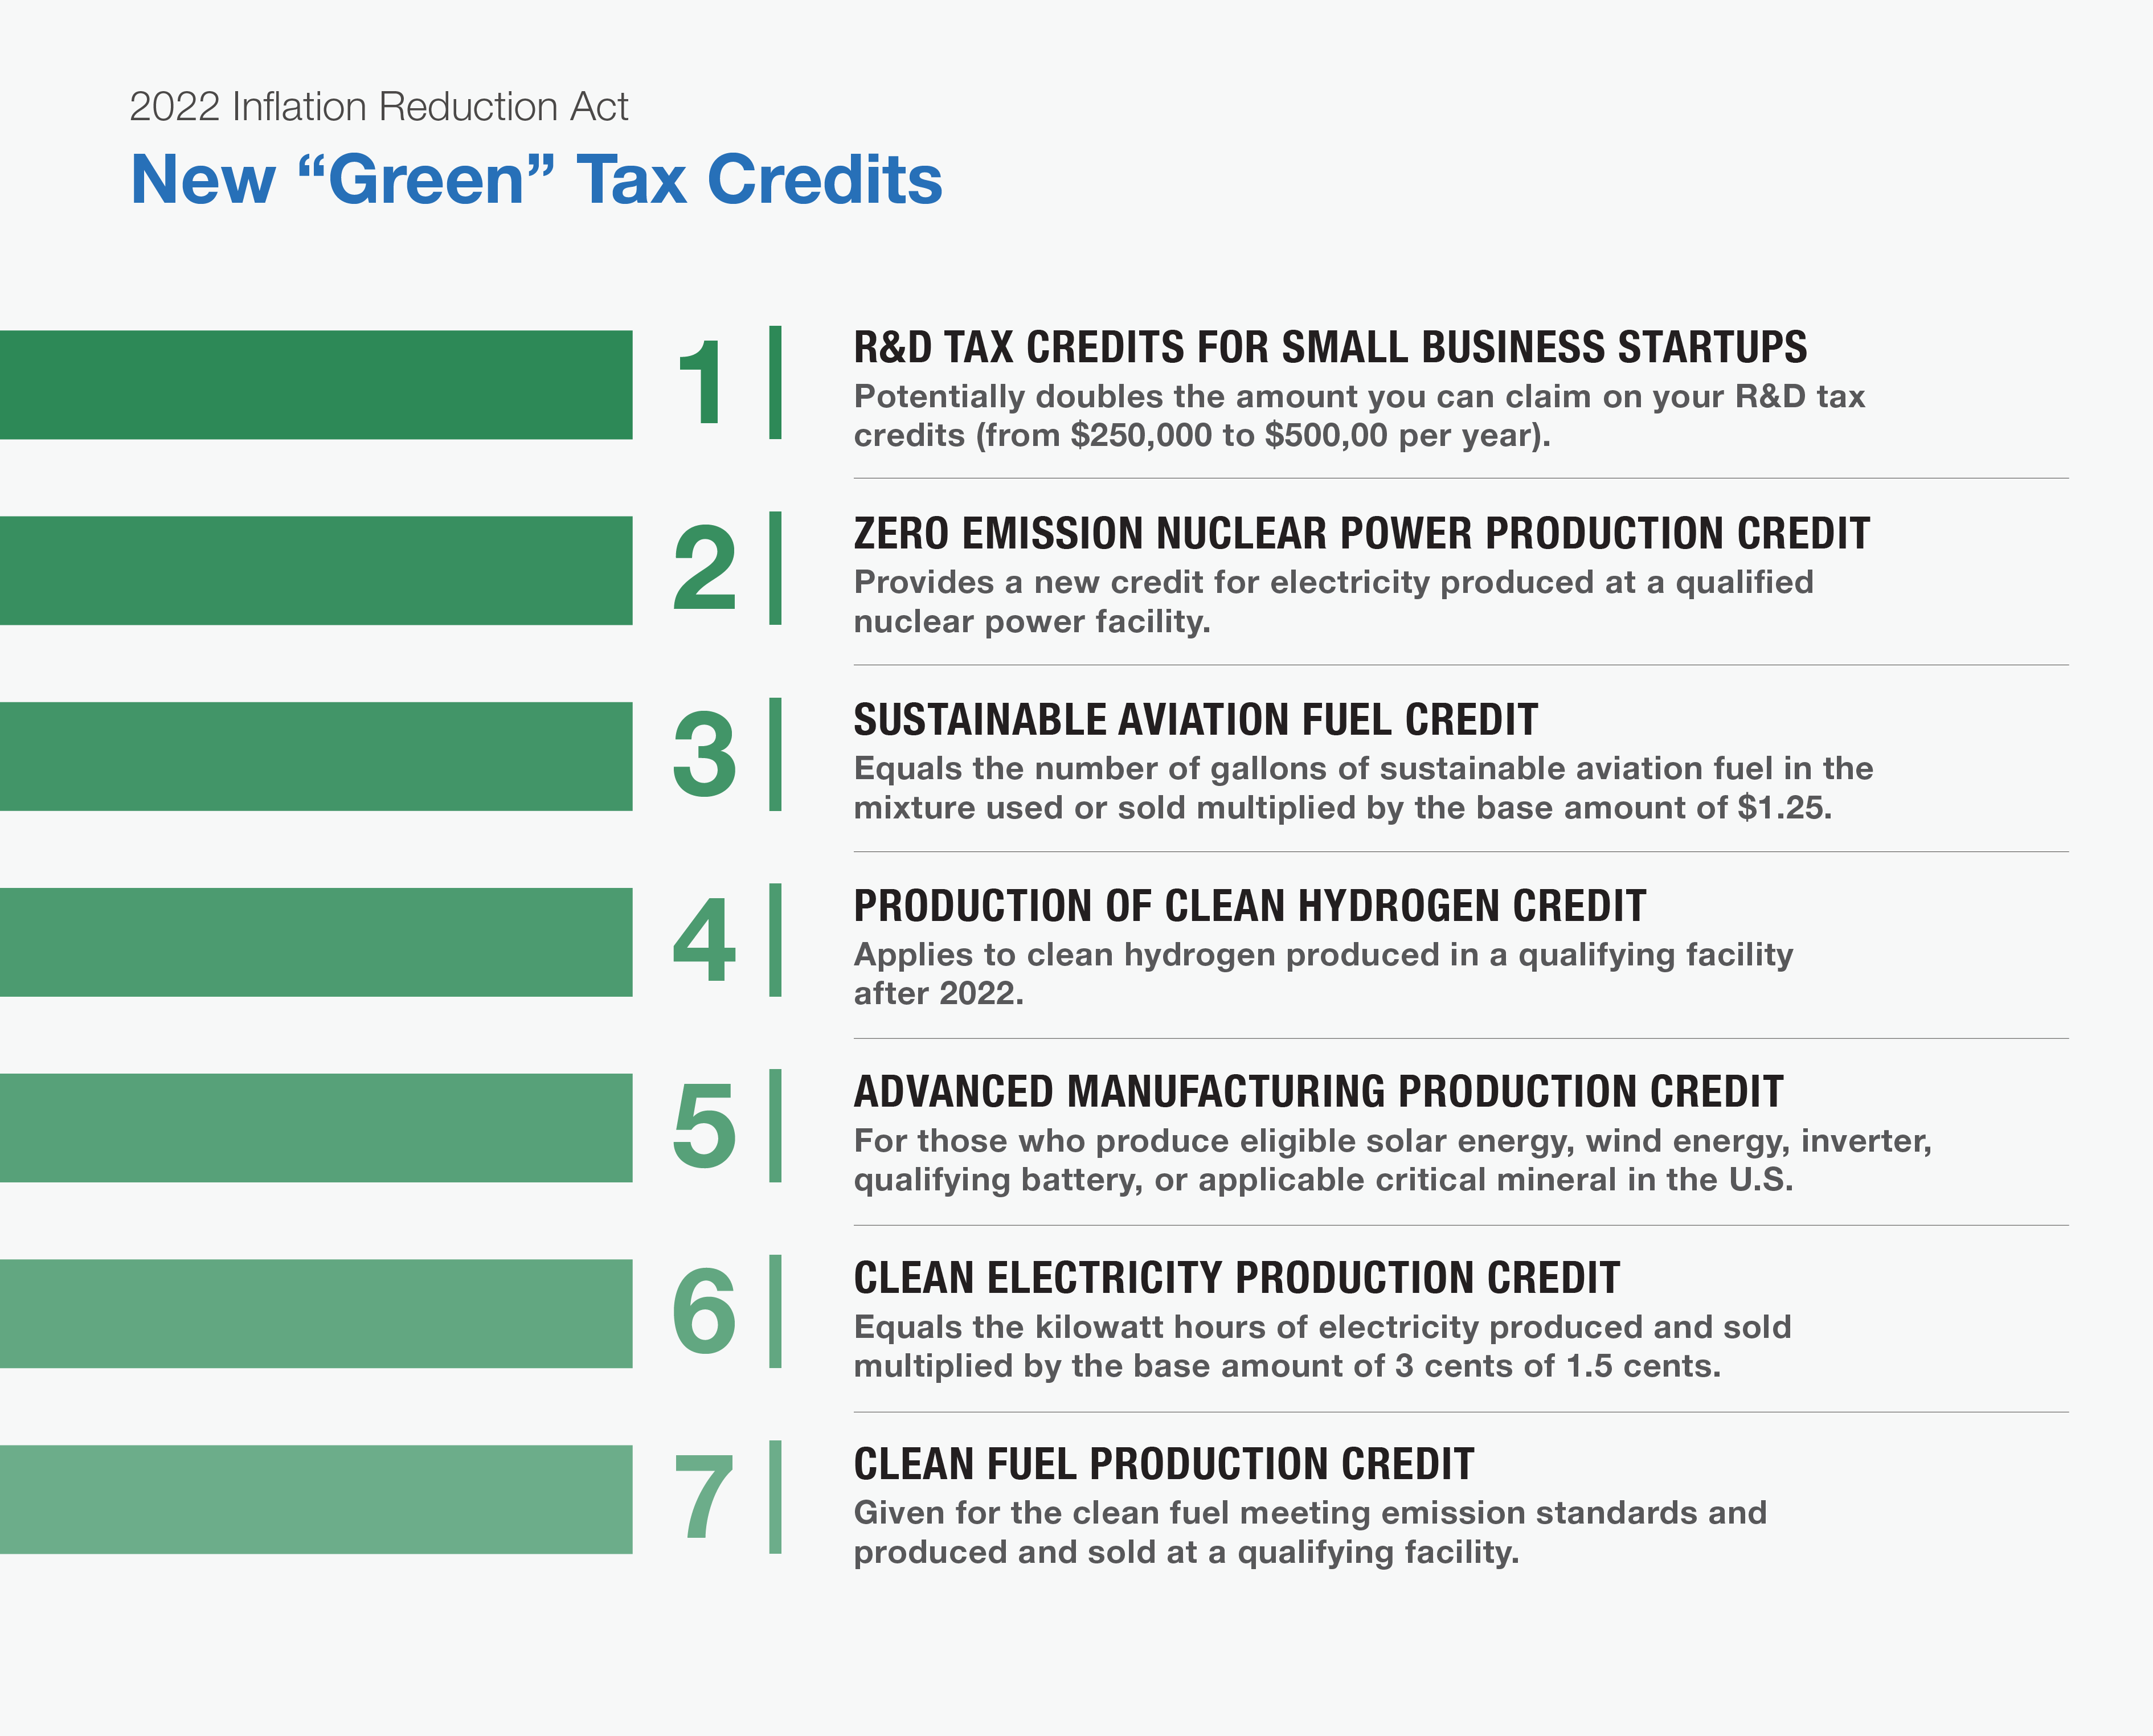 Guide To The Green Tax Credits And Incentives In The Inflation 